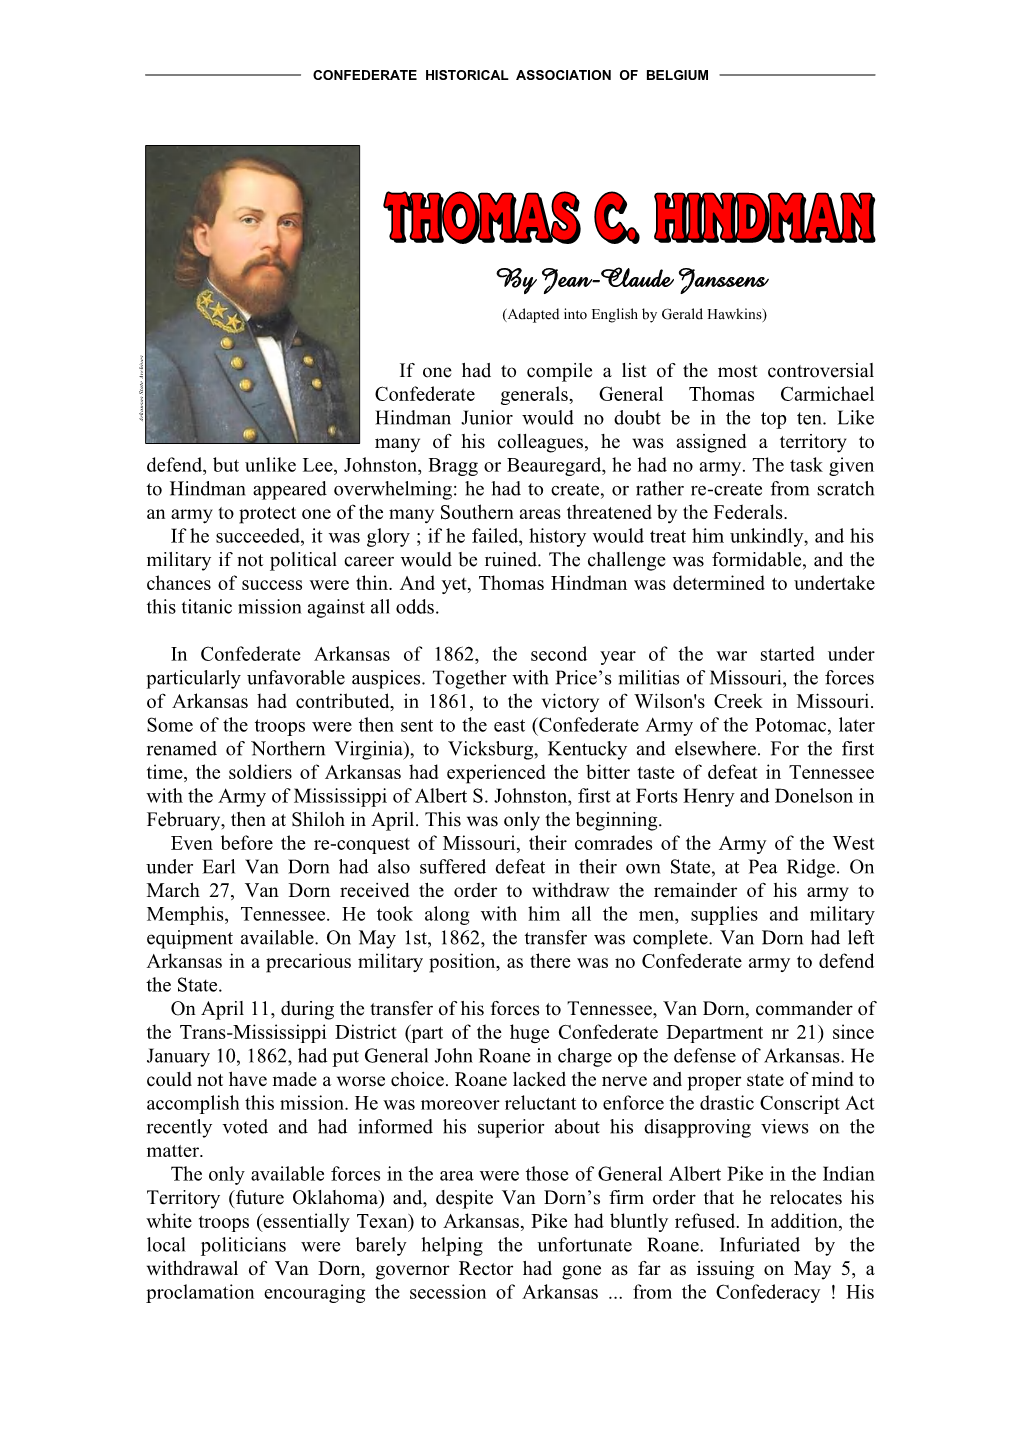 Thomas Hindman Was Determined to Undertake This Titanic Mission Against All Odds